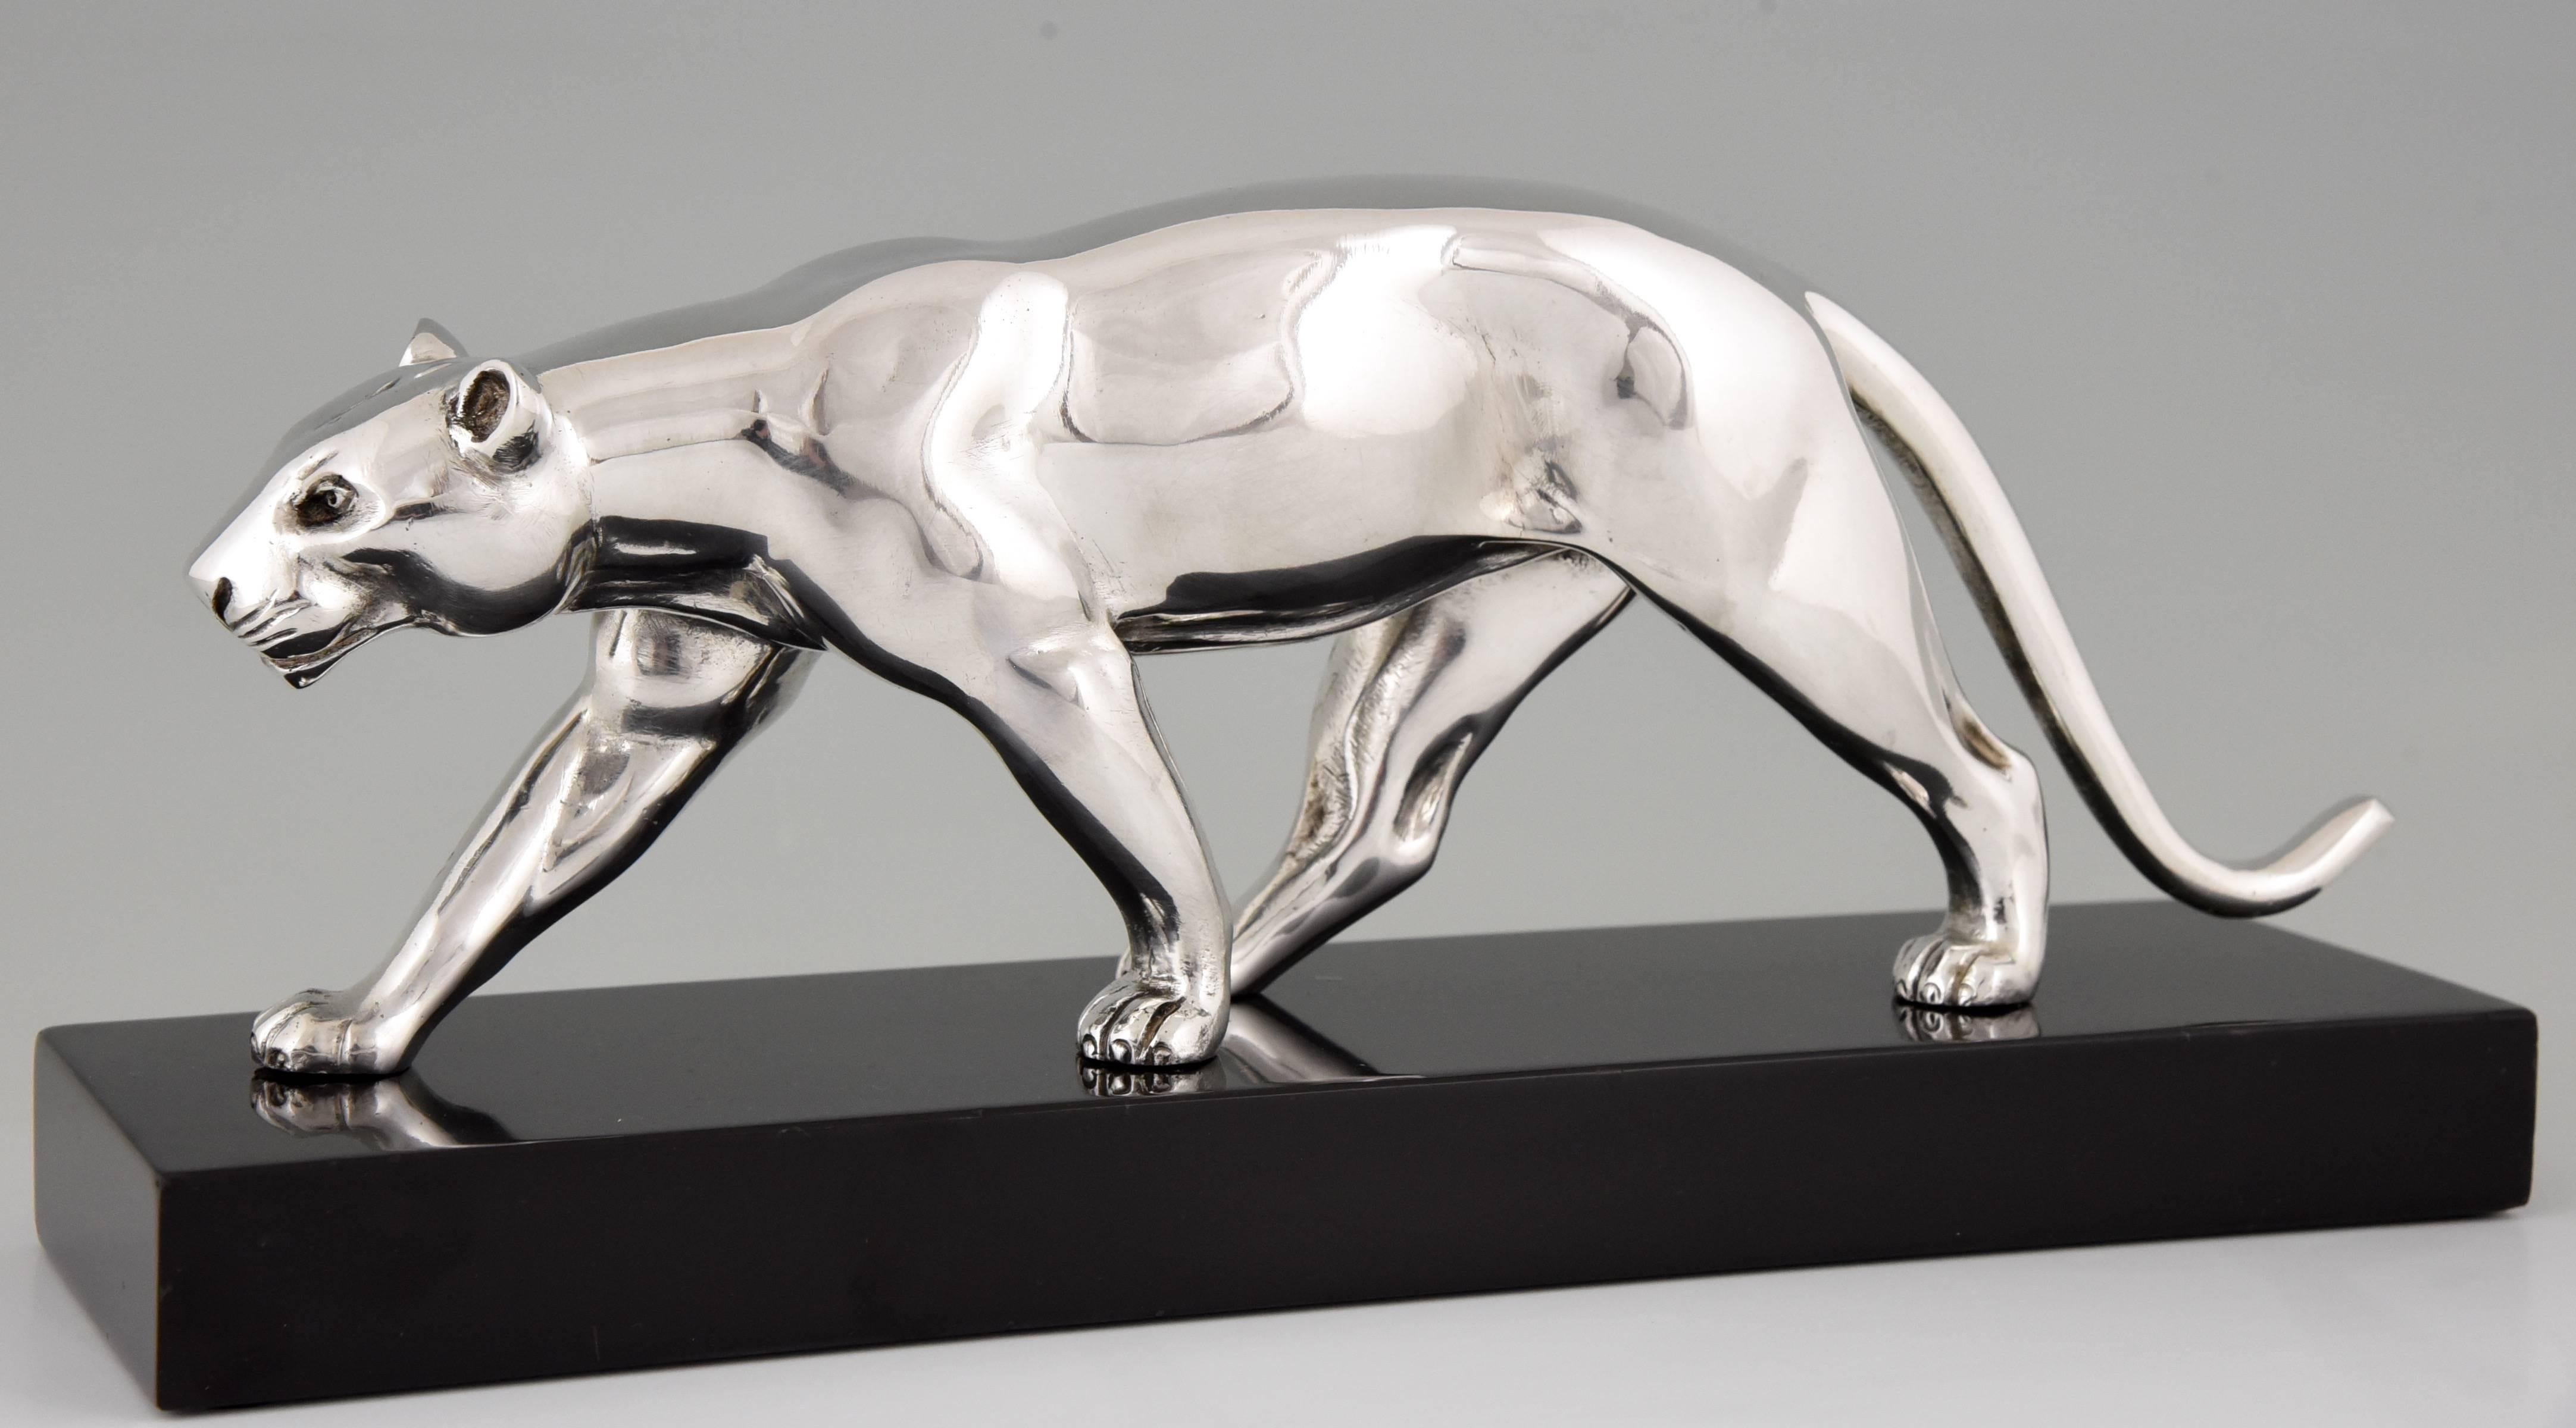 Artist/ Maker: Alexandre Ouline.
Signature/ Marks: Ouline.
Style: Art Deco.
Date: 1930.
Material: Silvered bronze on marble base.
Origin: France.
Size: L 32.5 cm. x H 14.5 cm x W 9 cm.  
L 12.8 inch X H 5.7 inch x W 3.5 inch.
Condition: